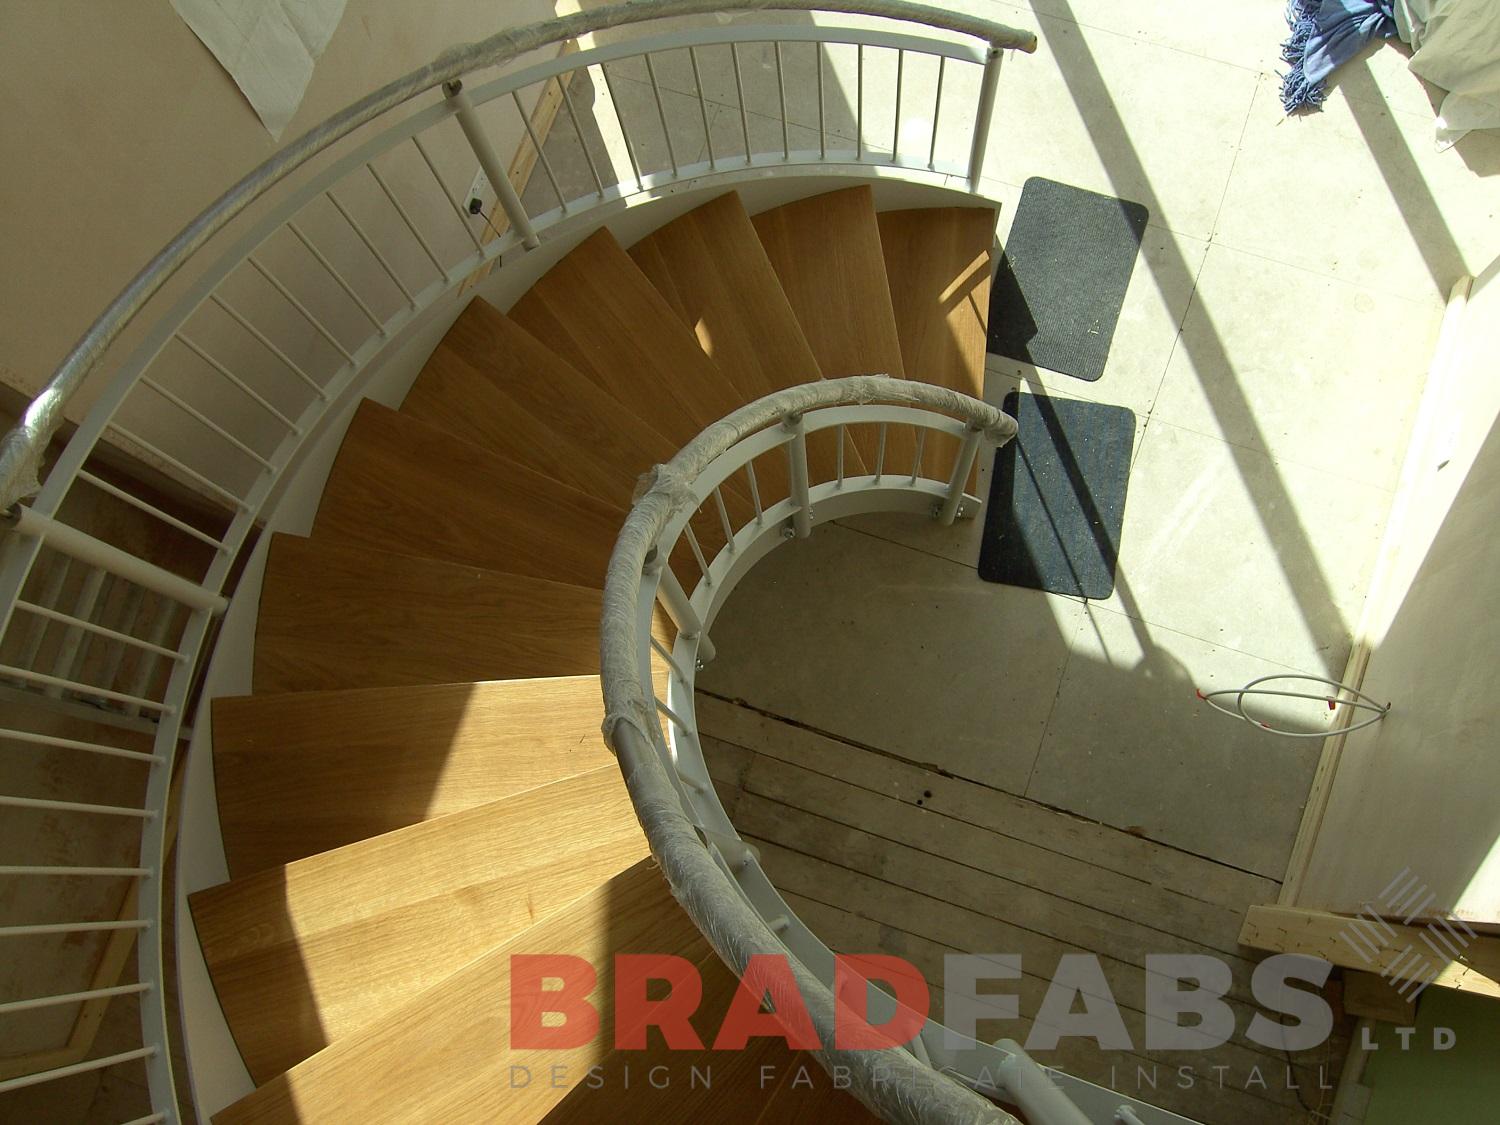 Helix Staircase manufactured by Bradfabs